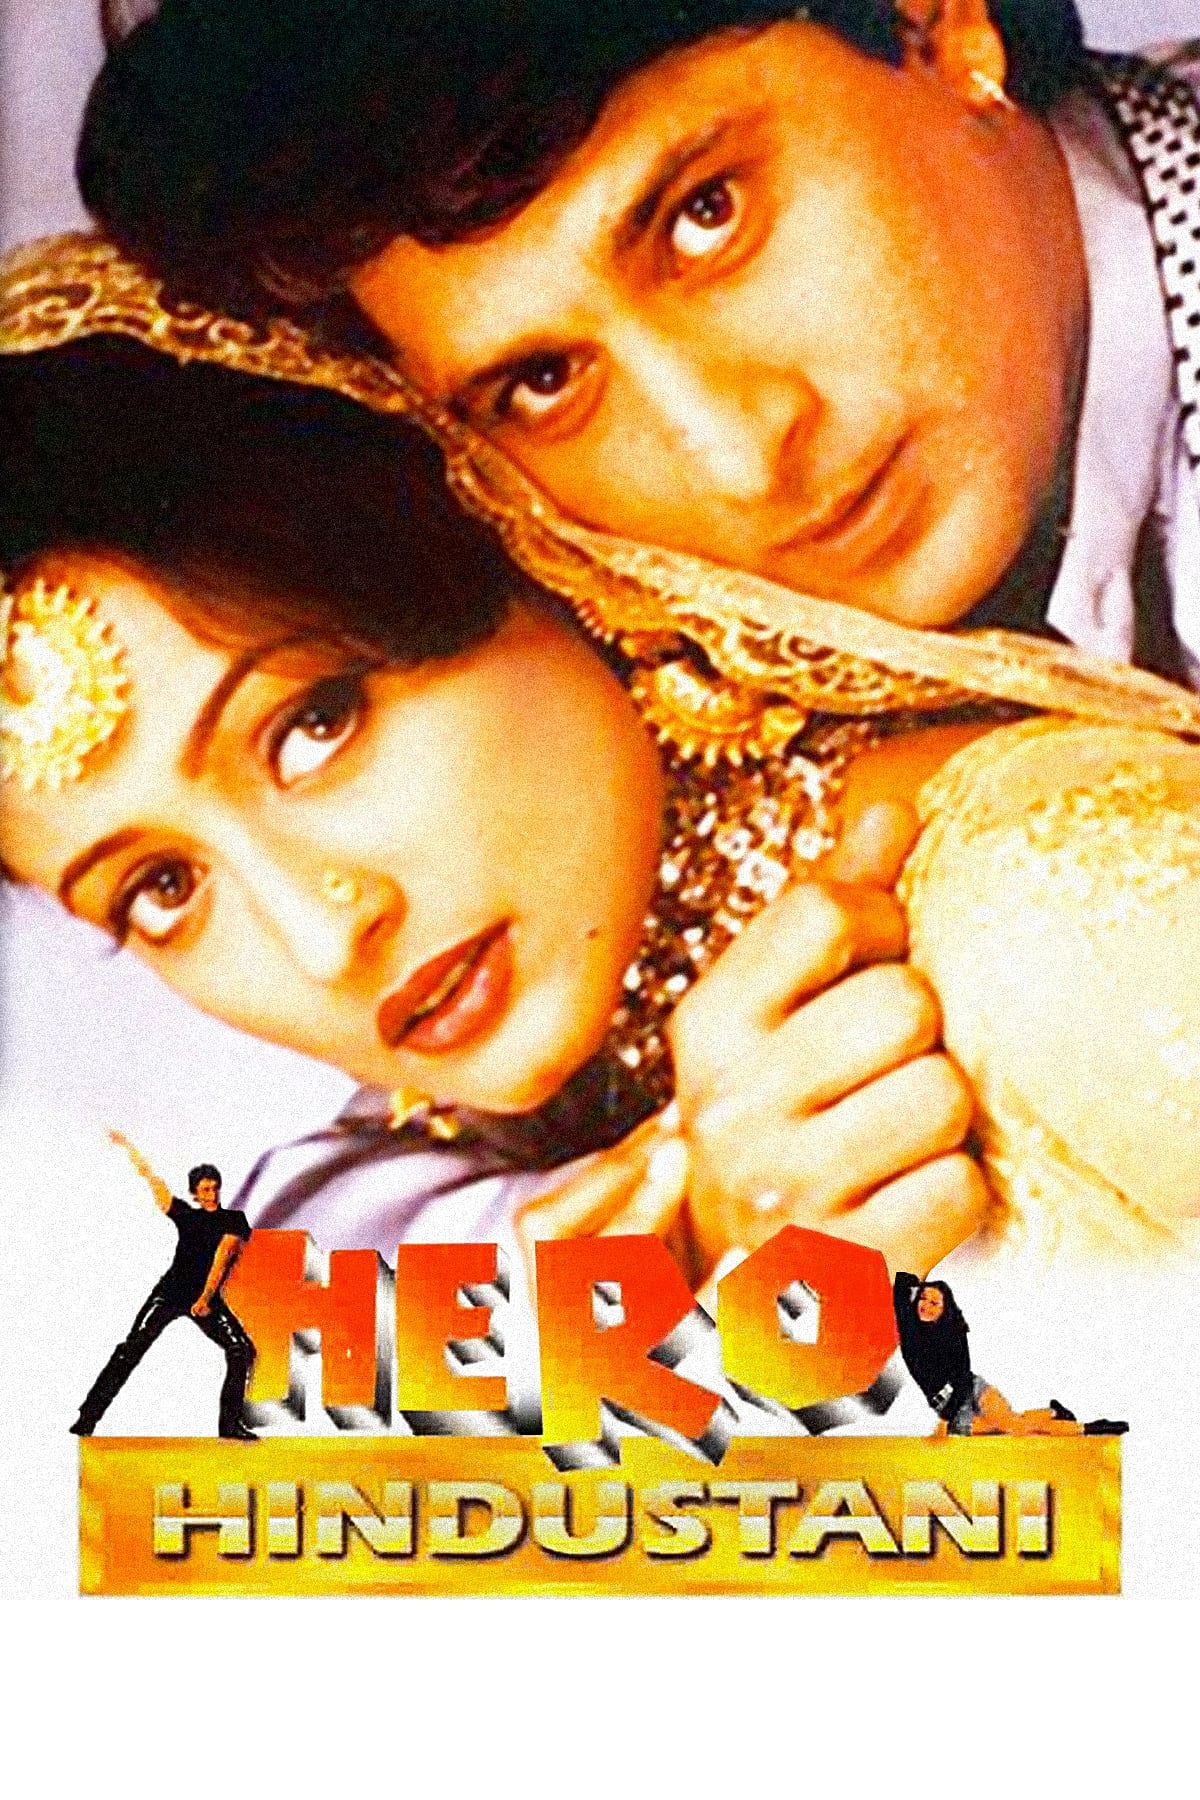 Poster for the movie "Hero Hindustani"